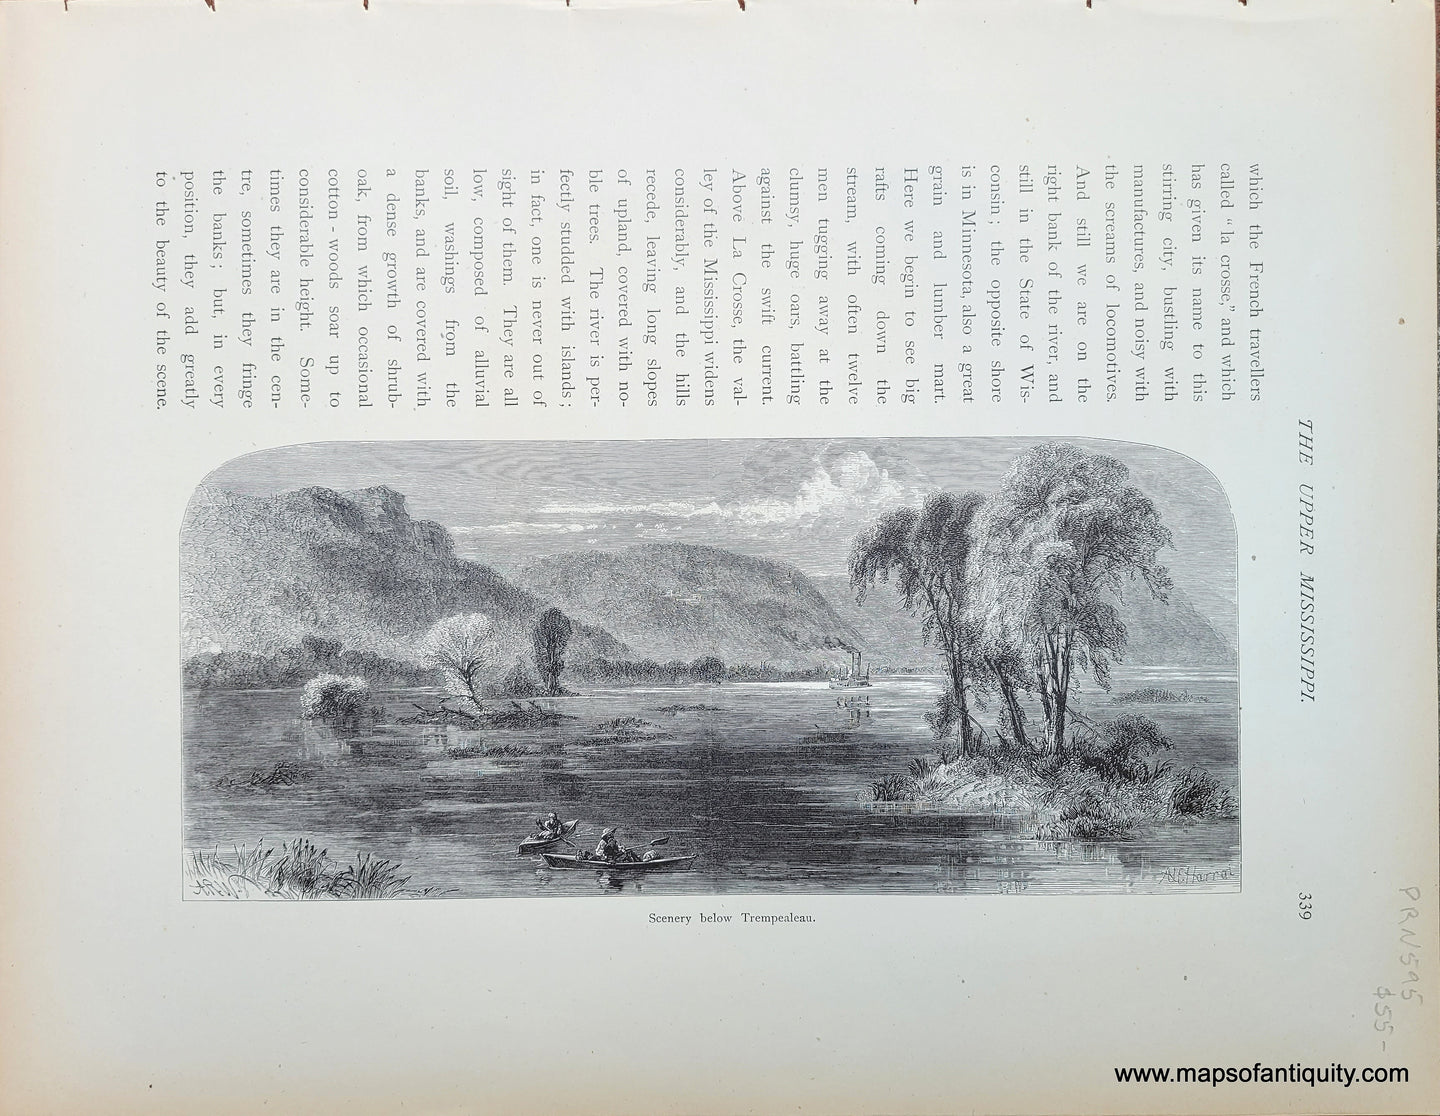 Antique page turned sideways so that the illustration is right side up but the text (which appears above the image in this orientation) is sideways. Shows a scene on the Mississippi River with Kayaks near Trempealeau wisconsin